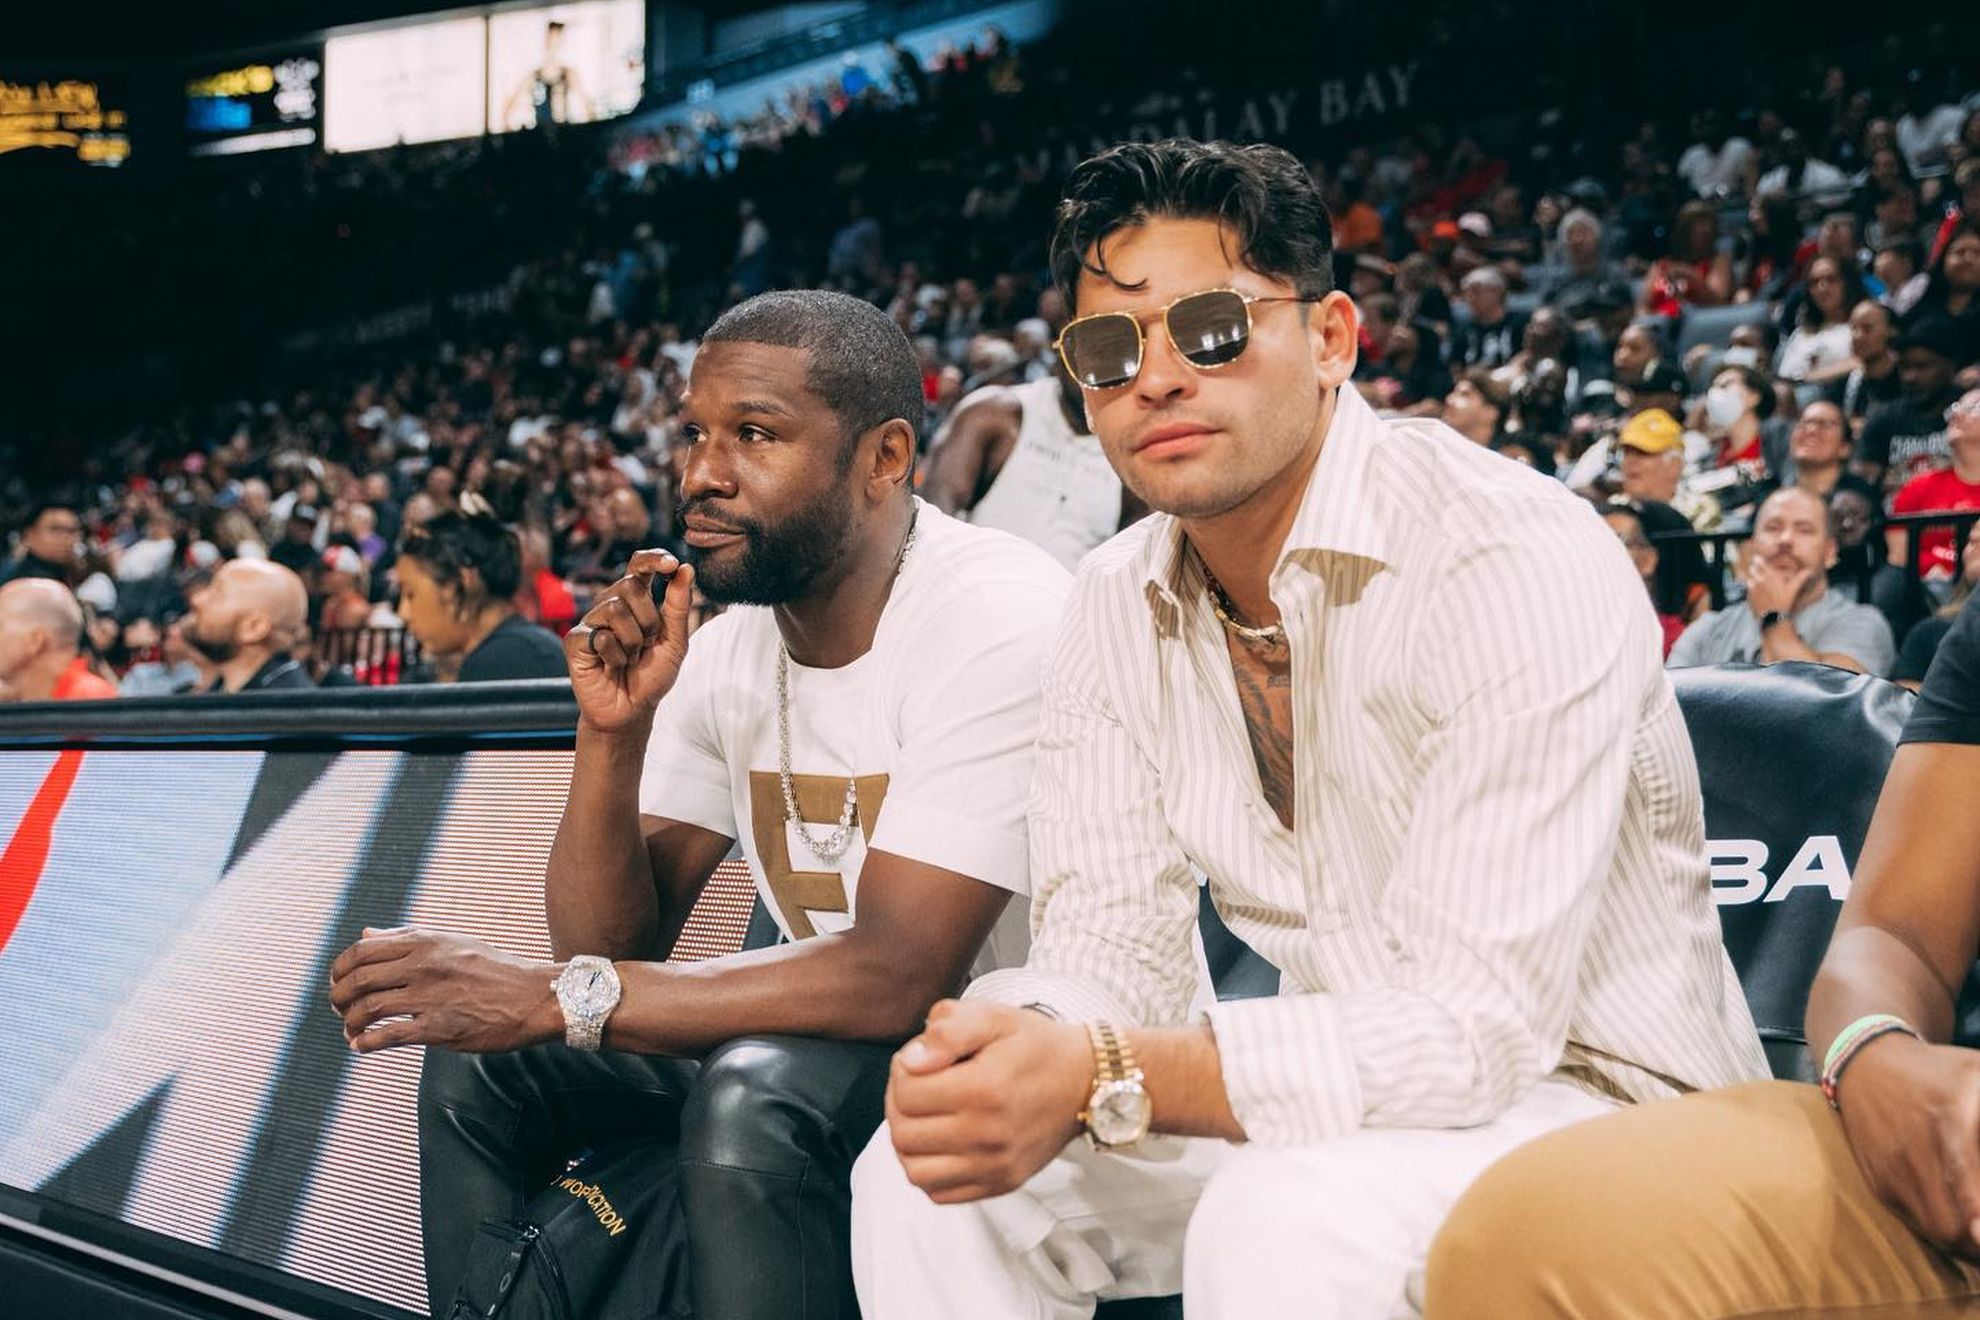 Ryan Garcia Stands By His Friendship With Floyd Mayweather Despite Backlash